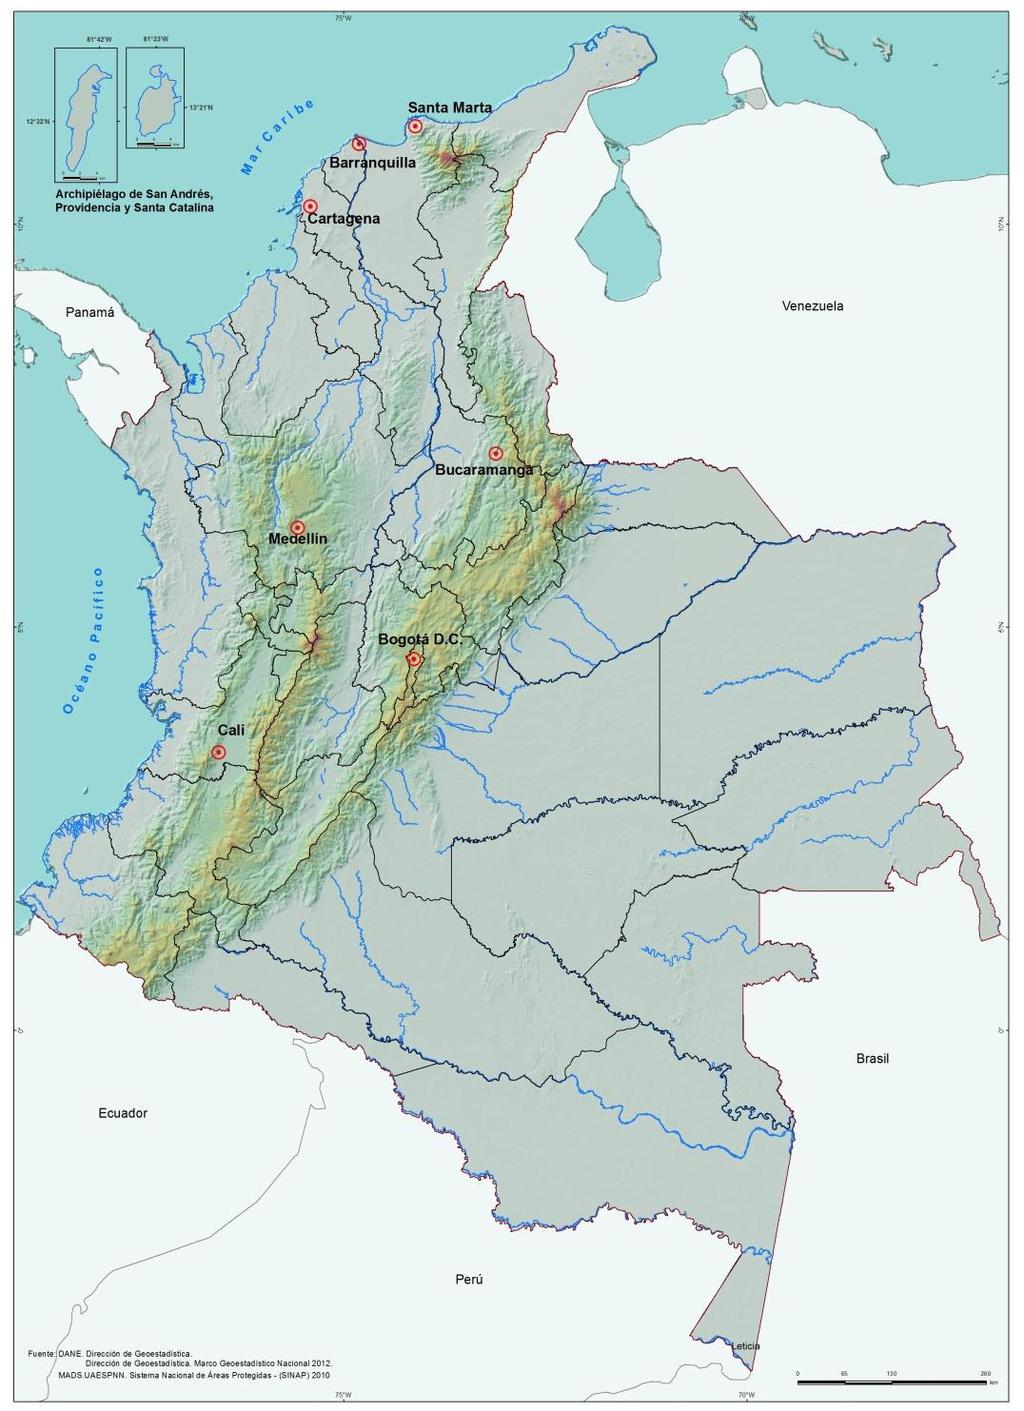 Short description Approximately 47 million of Colombians 75% living in urban areas 25% living in rural areas The Andean region is the most populated region 70% of Colombians The main capital cities